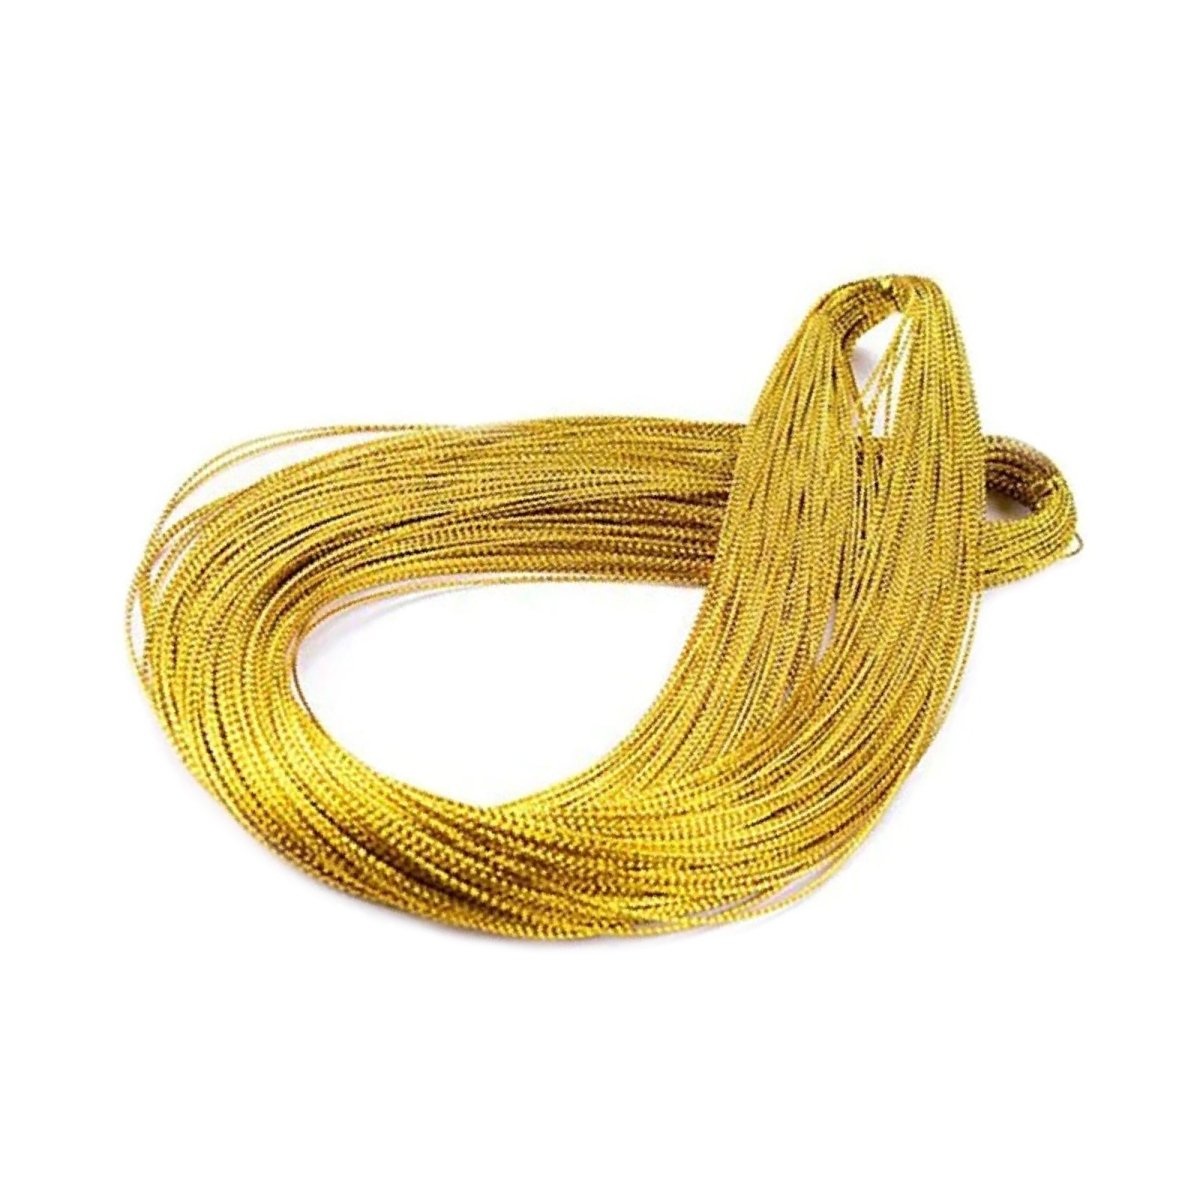 100M Gold Thread Tag Thread 1mm Silver String Metallic Cord Jewelry Thread DIY Craft String Gift Tags String Hang Tags Rope - Gold - - Asia Sell